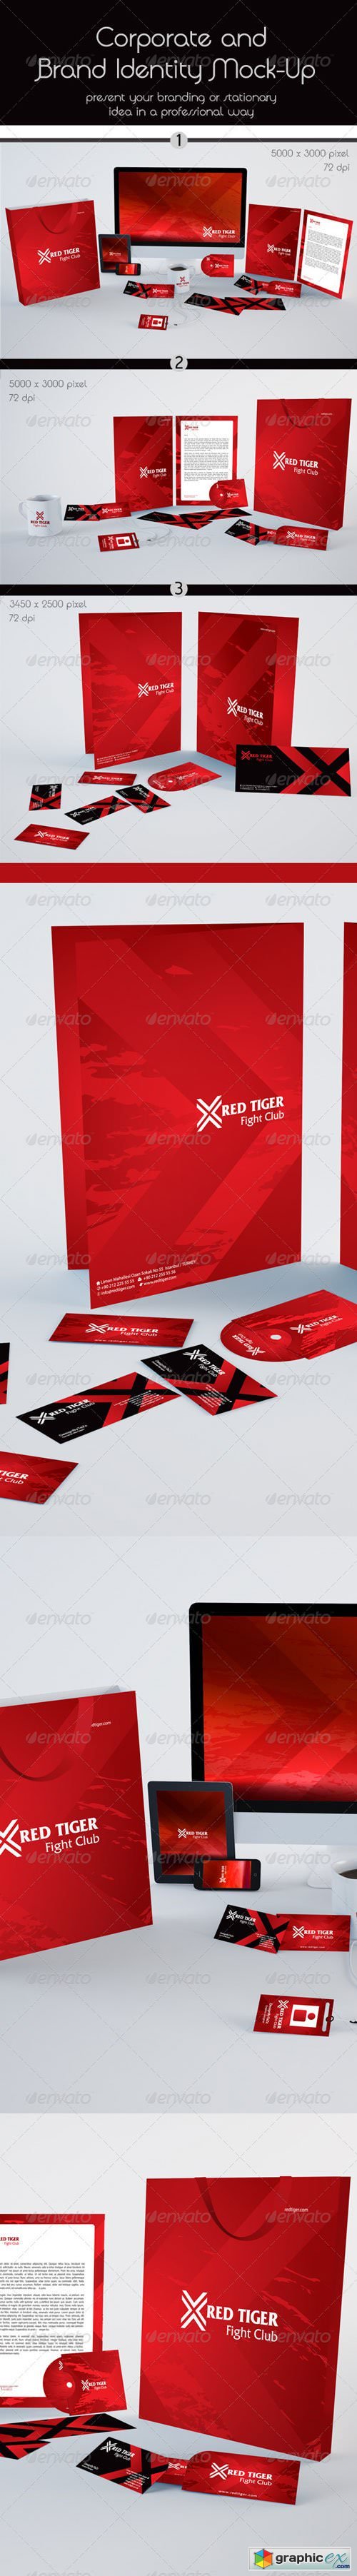 Corporate and Stationery Brand Mock-Up 3392716